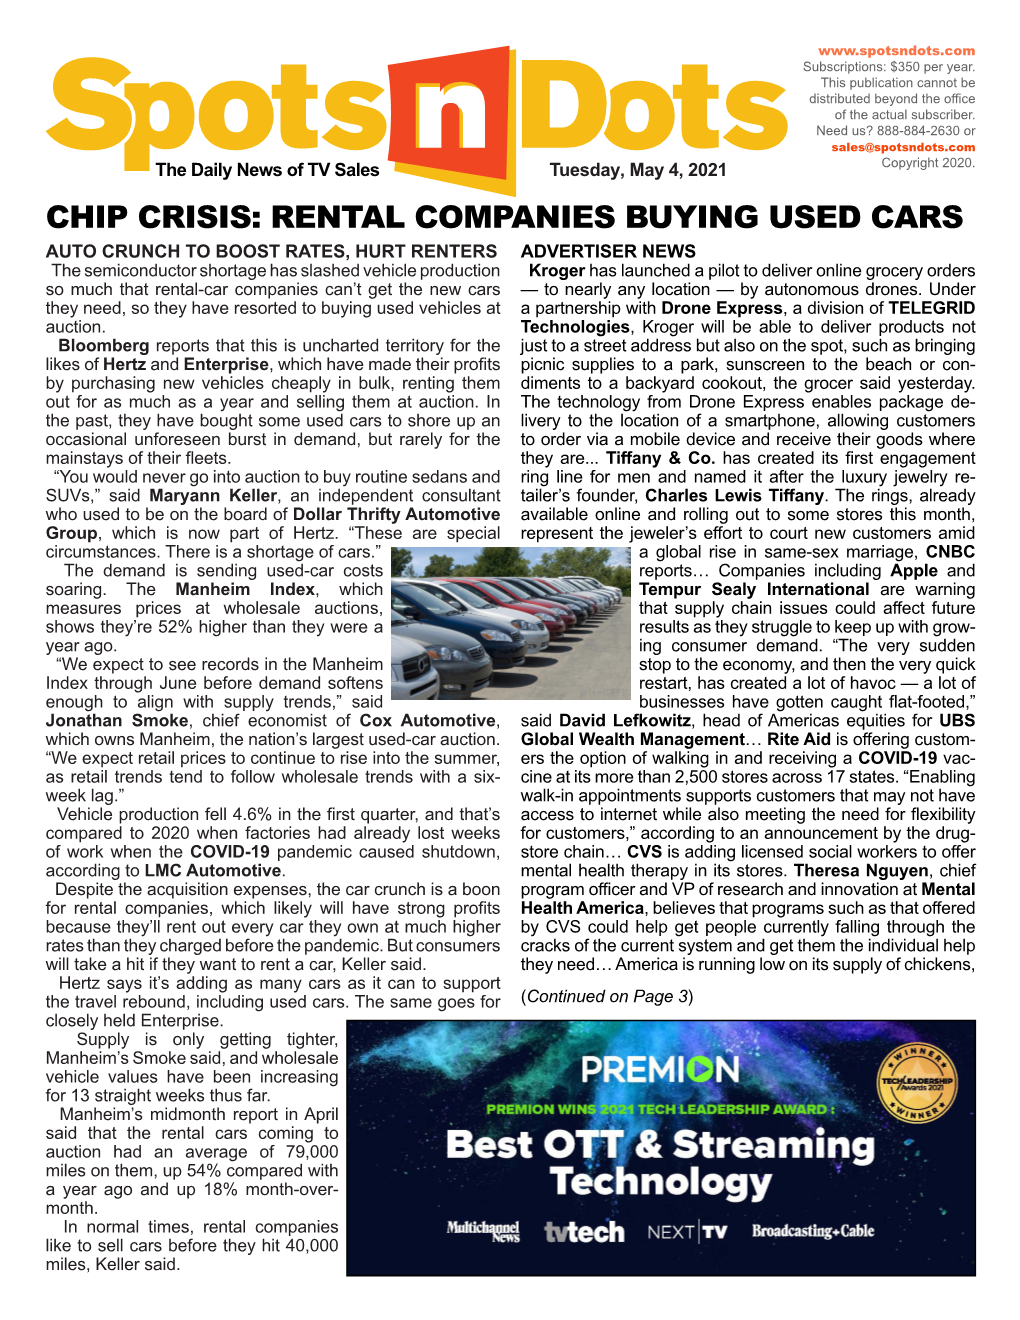 Chip Crisis: Rental Companies Buying Used